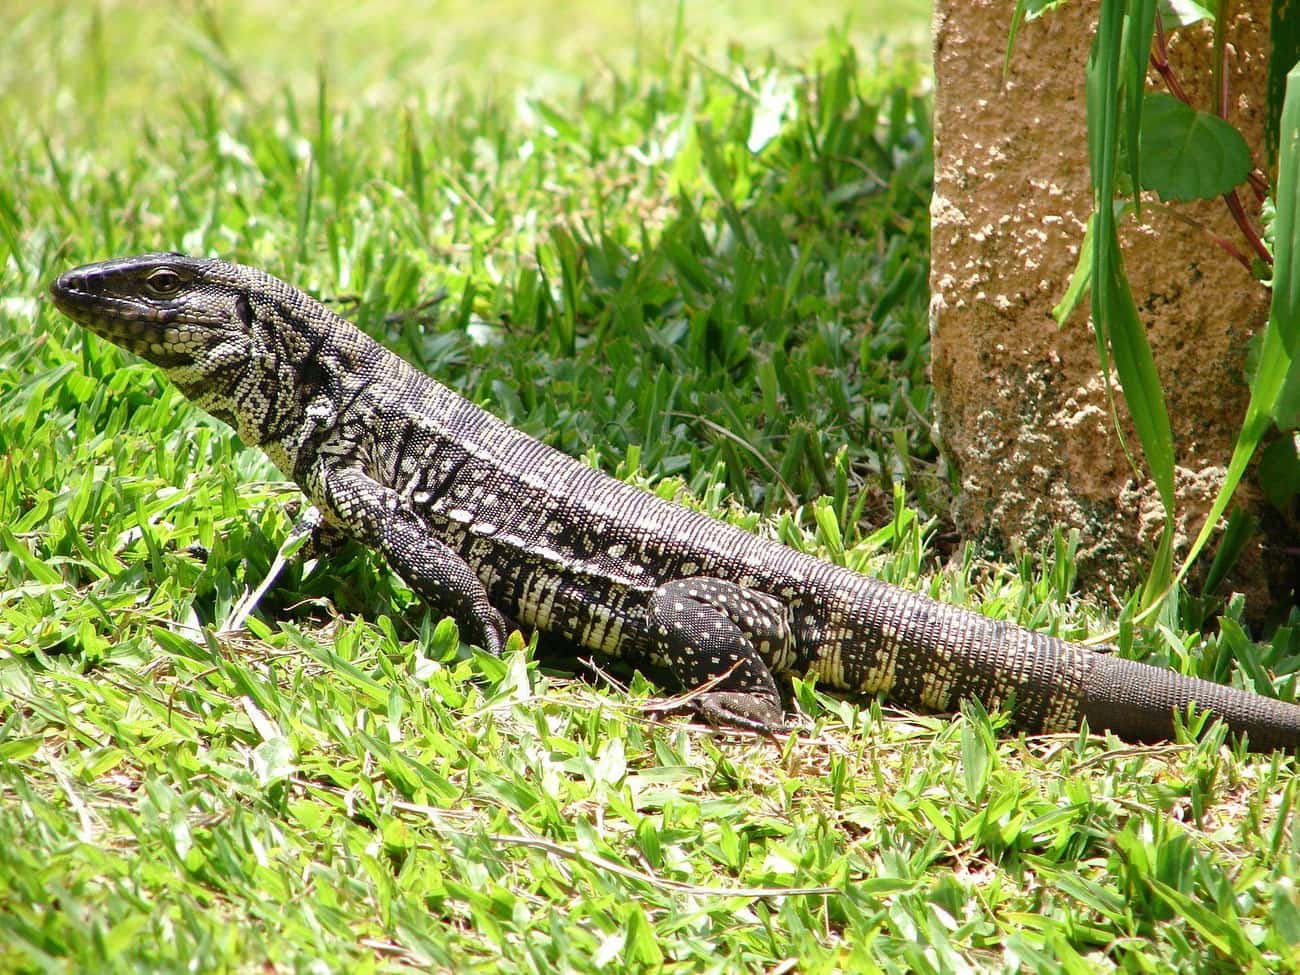 Tegu Lizards Are One Of The Biggest Problem Animals